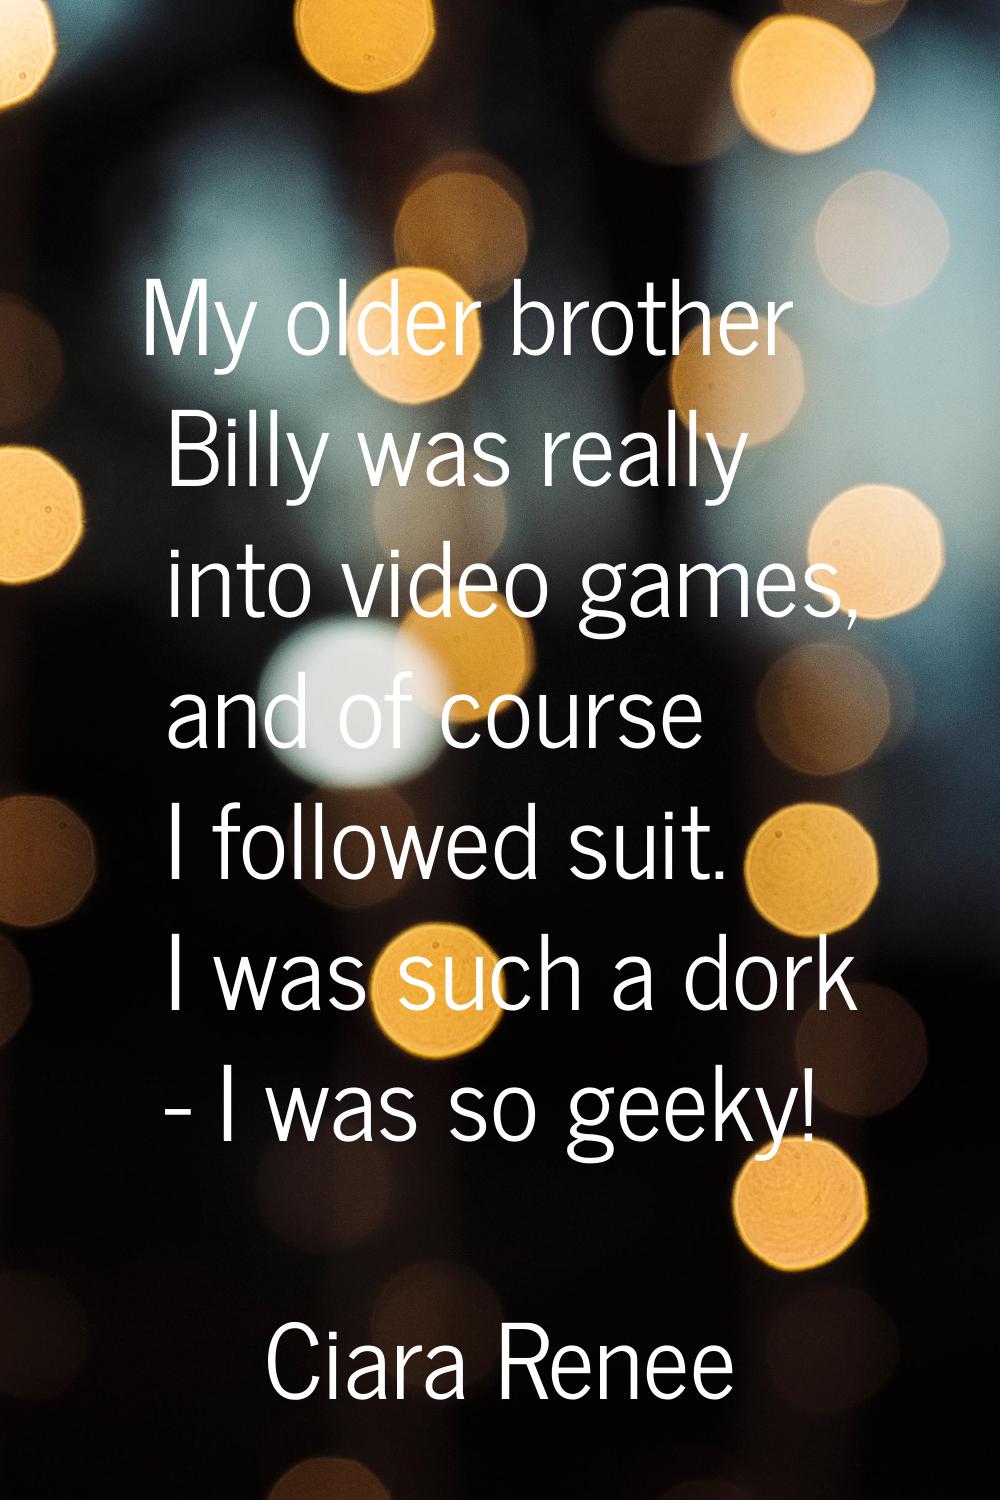 My older brother Billy was really into video games, and of course I followed suit. I was such a dor